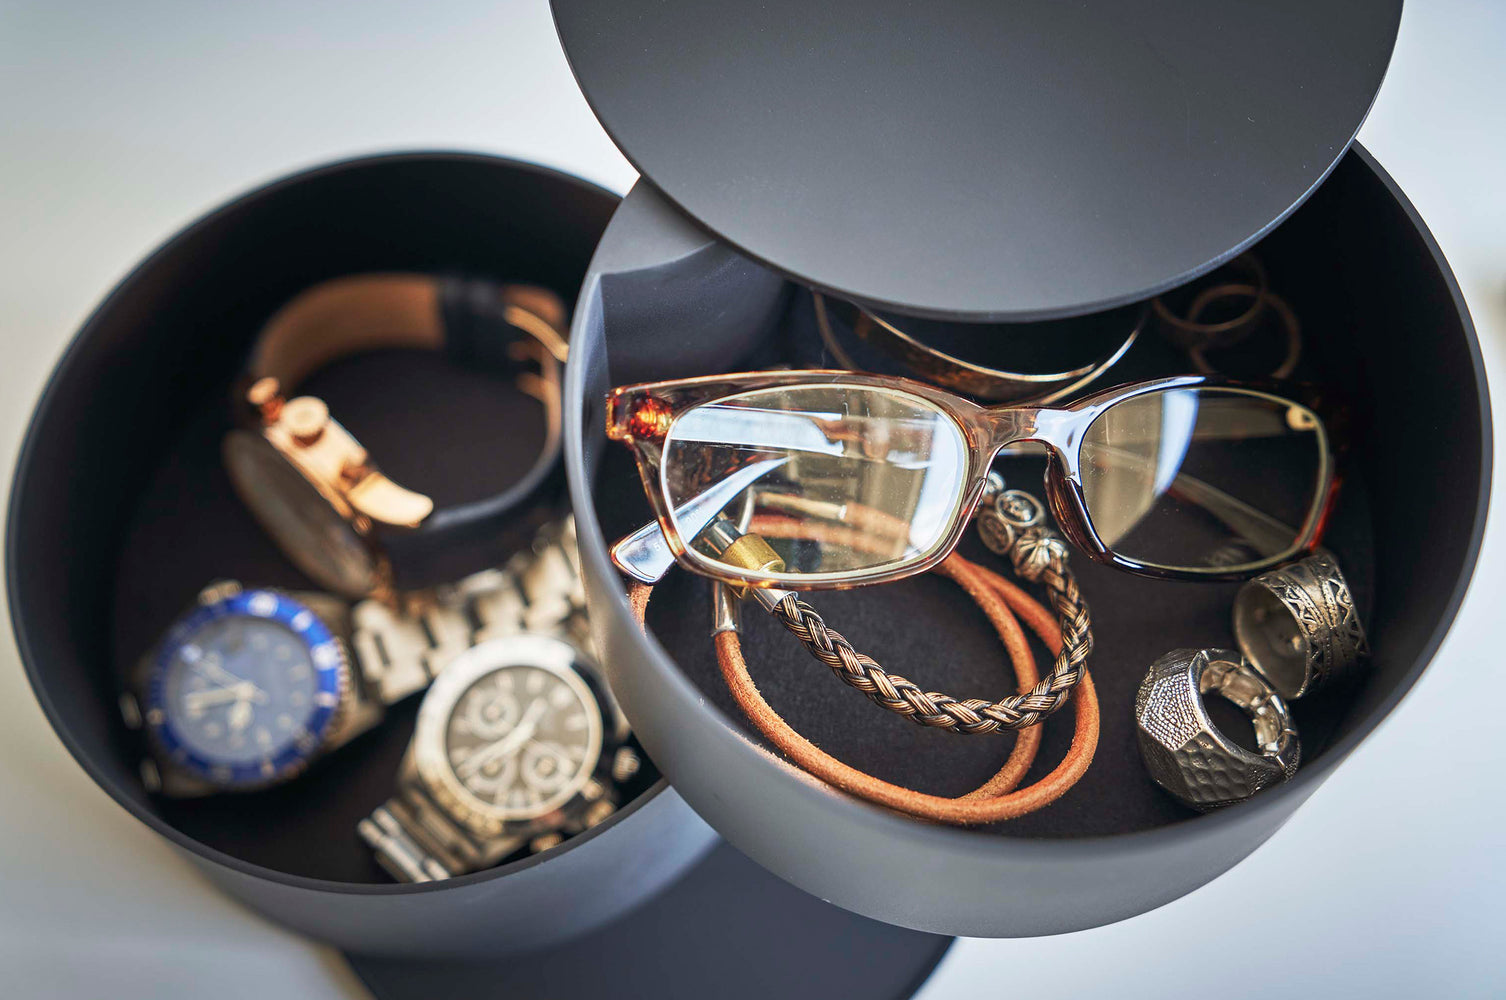 View 14 - A detailed shot of the inside contents of a black two-tier swivel accessory holder. The tiers and lid are swiveled open so the inside contents can be seen. The focus of the image is the first-tier contents, there is a pair of reading glasses, two silver statement rings, and an assortment of corded bracelets. Out-of-focus in the second tier are three watches of different styles. Both compartments are lined with a felt liner.